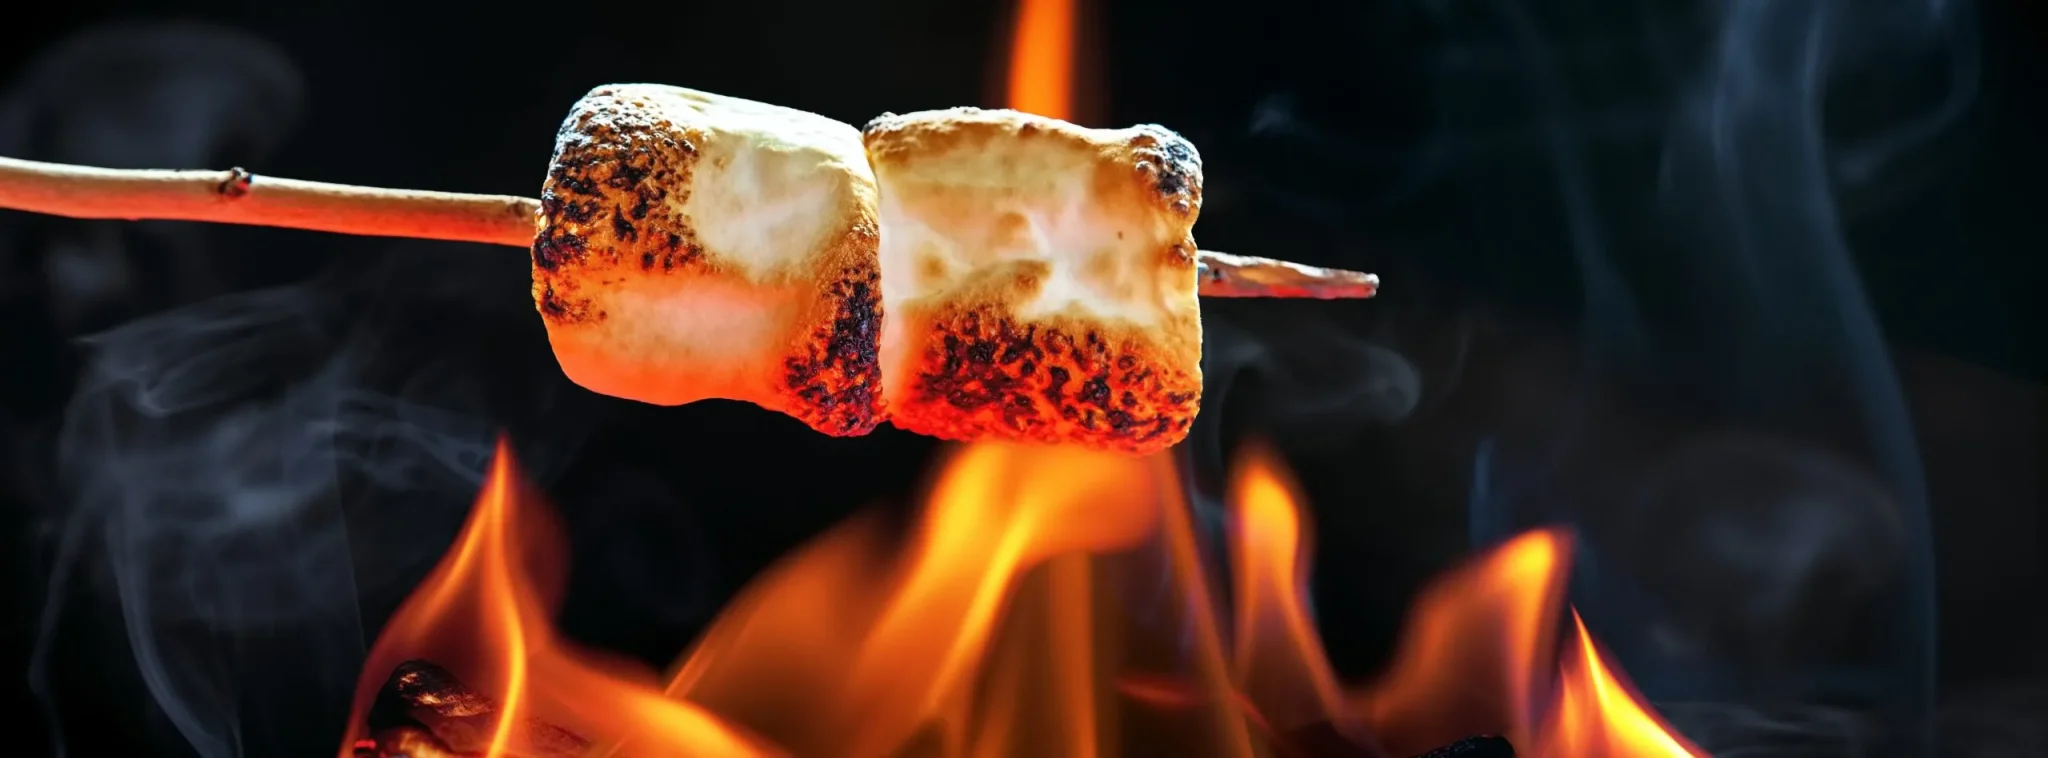 belong A s'more on a stick with flames in the background.